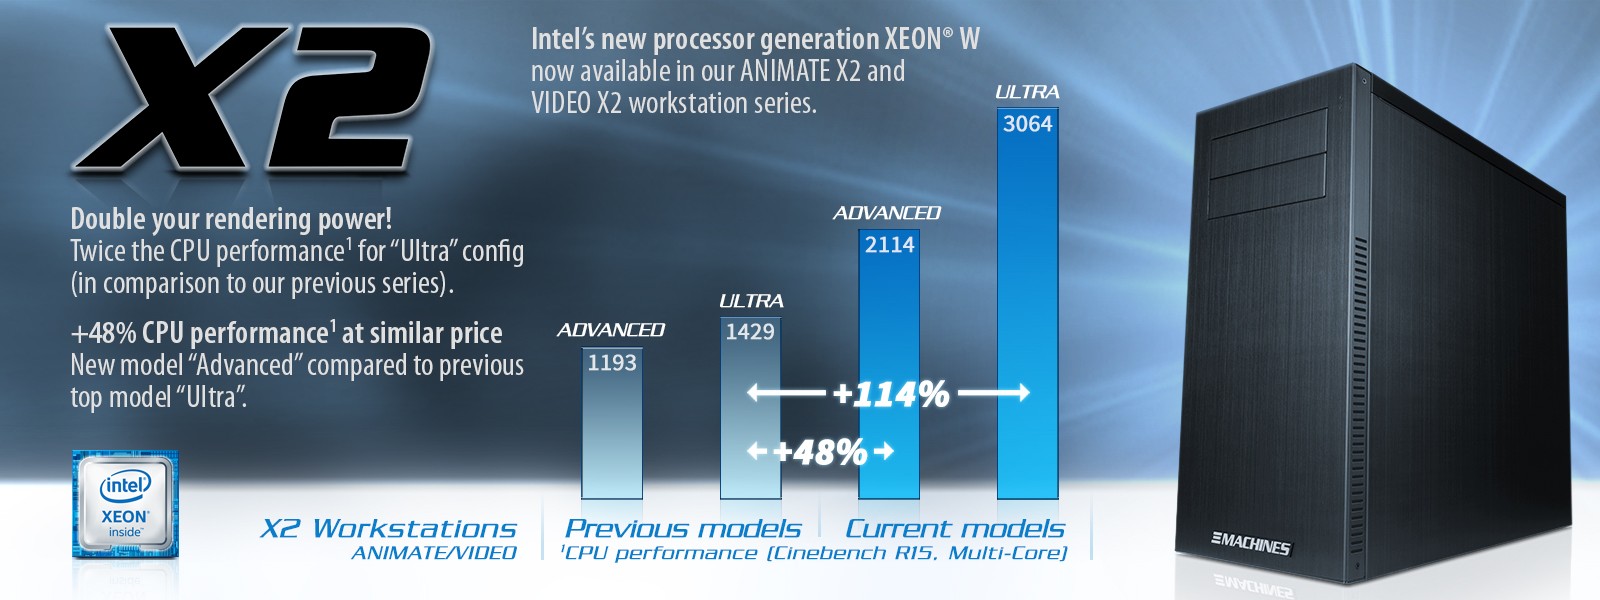 ANIMATE X2 WORKSTATIONS with Intel´s newest CPU generation Xeon W